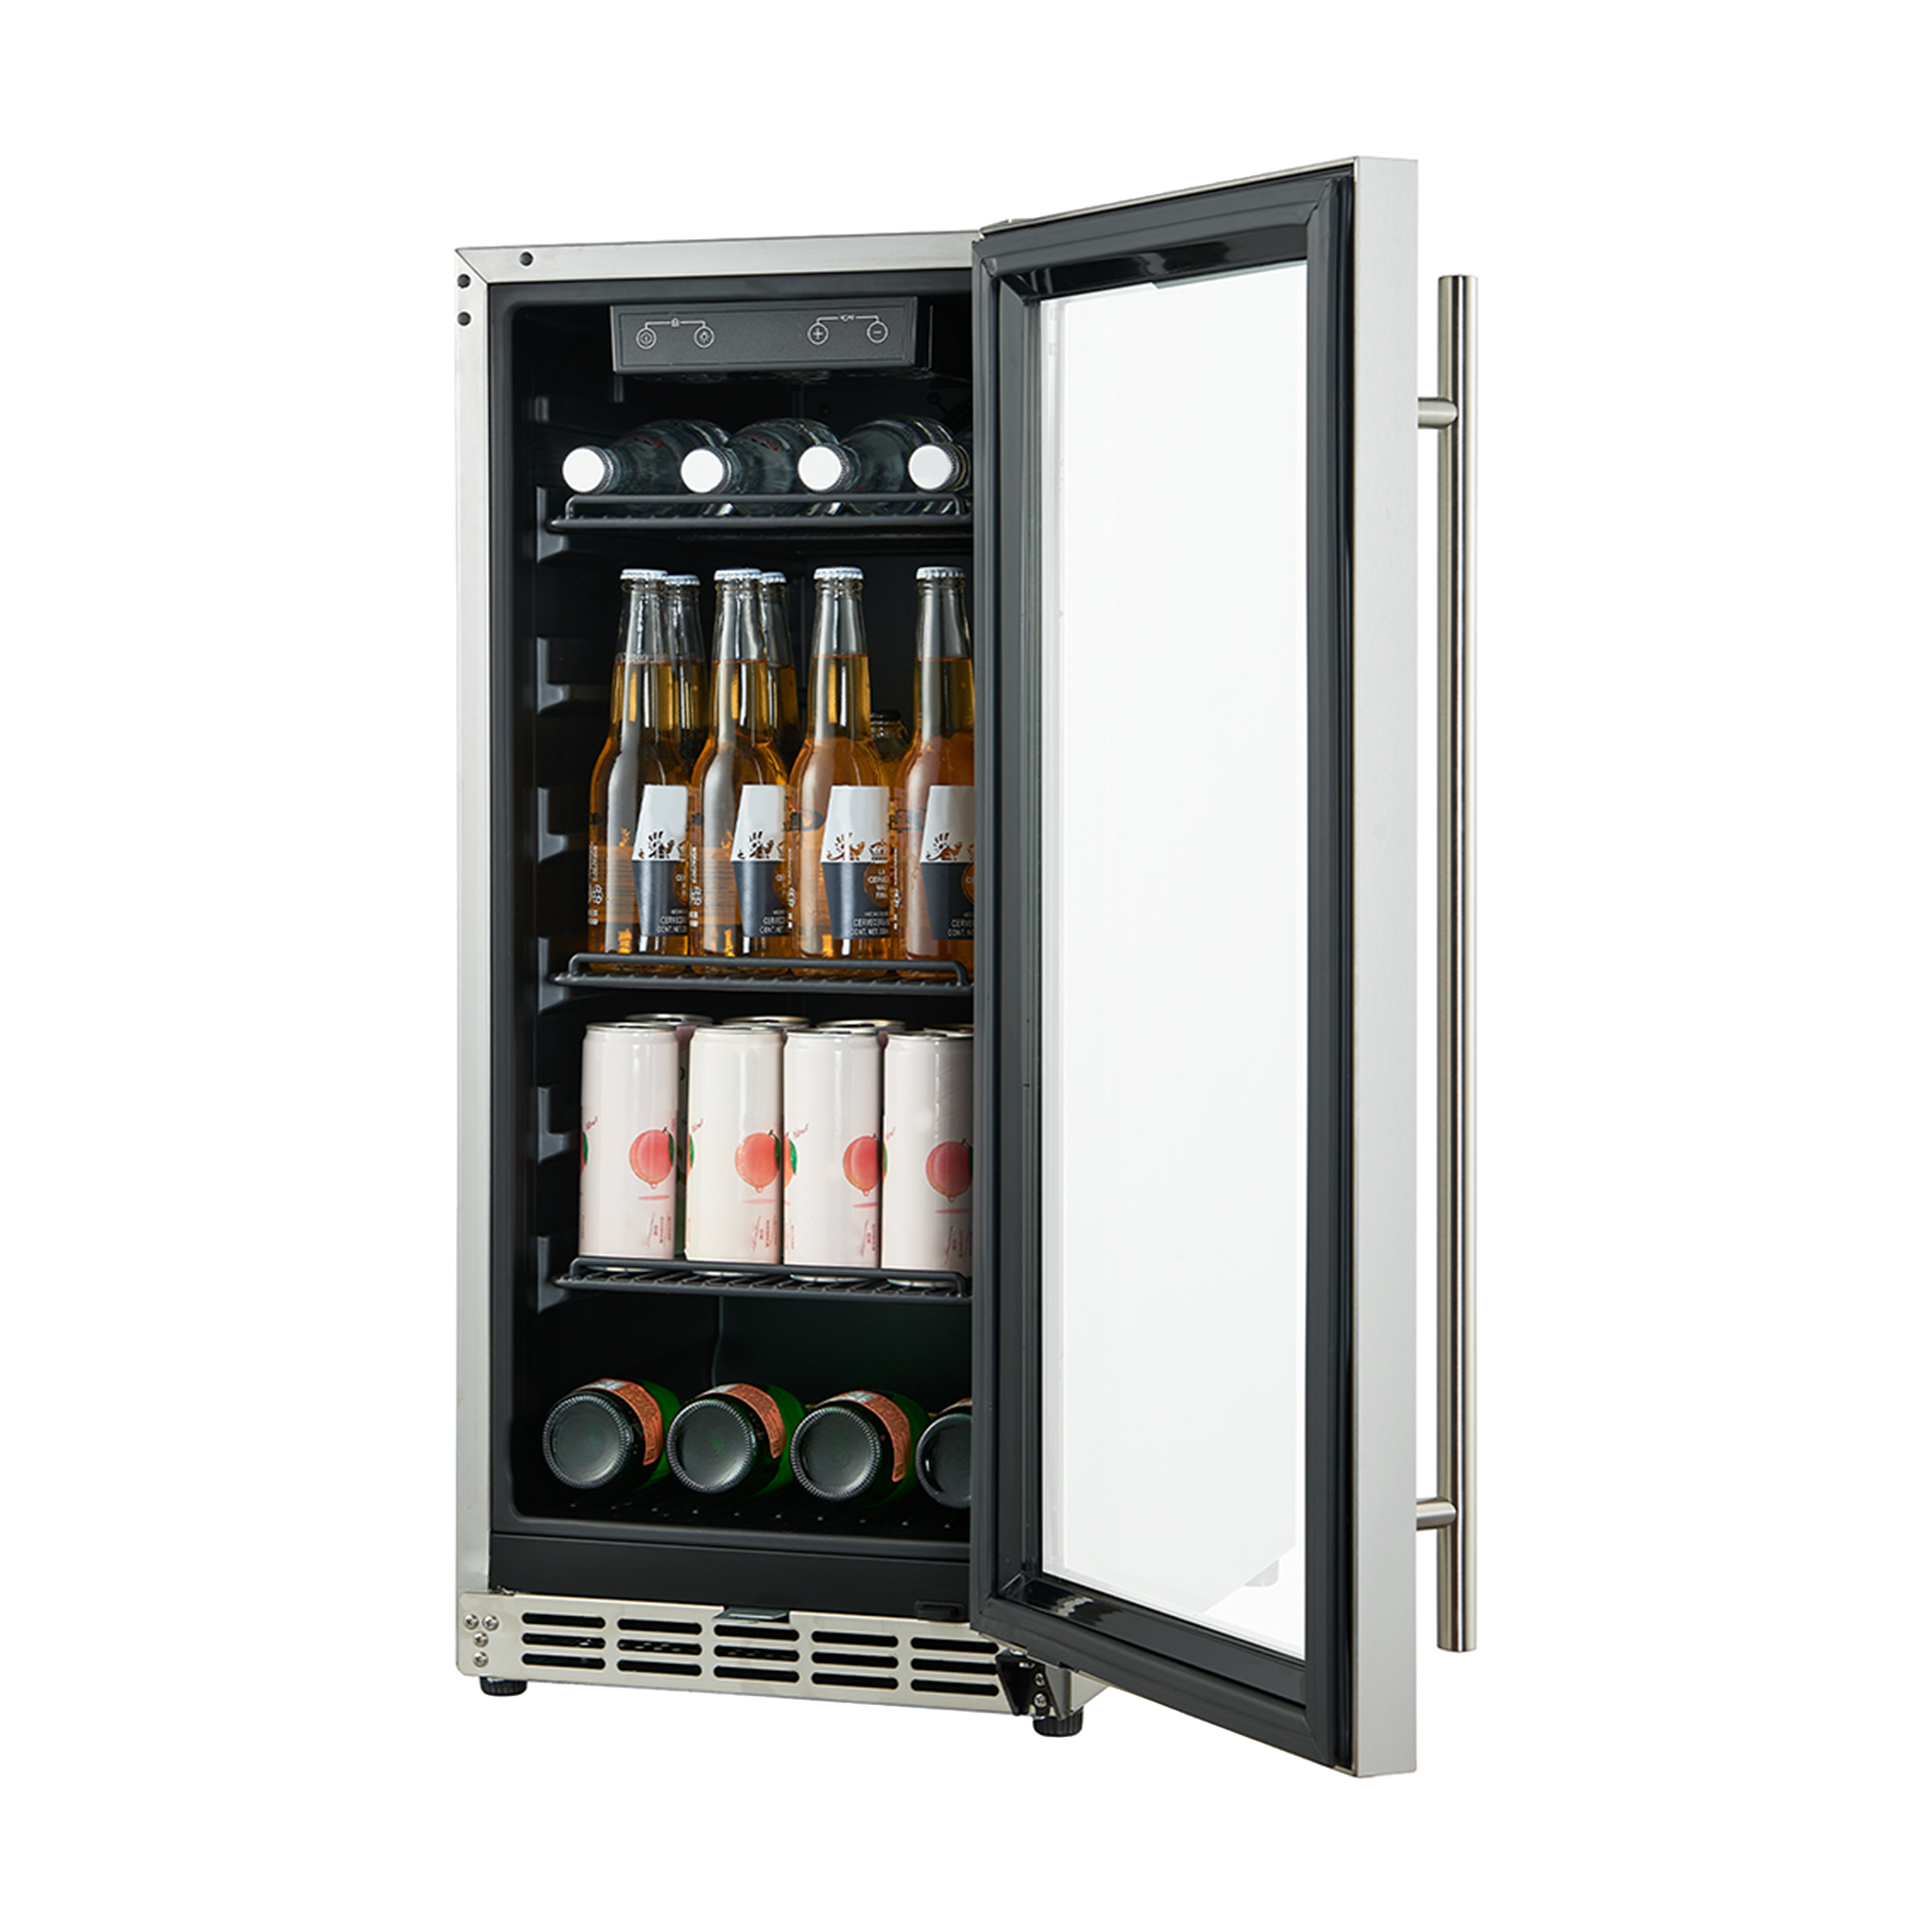 Side view of a 3.2 Cu Ft Compact Beverage Outdoor Refrigerator 96 cans with the door open, showcasing three shelves interior space full of beverage bottles and a digital temperature control panel